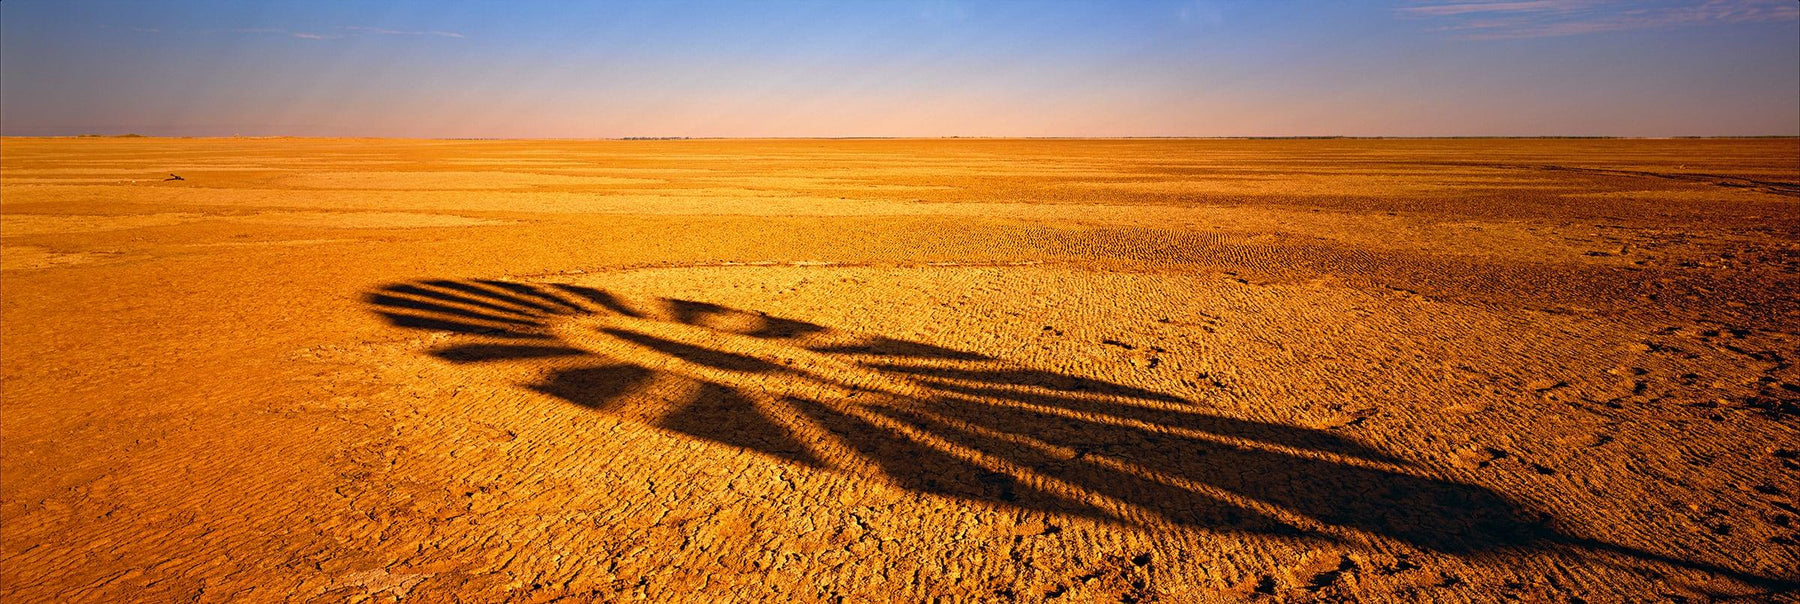 Shadow of a windmill blades being cast onto the dry desert floor in Normanton Australia